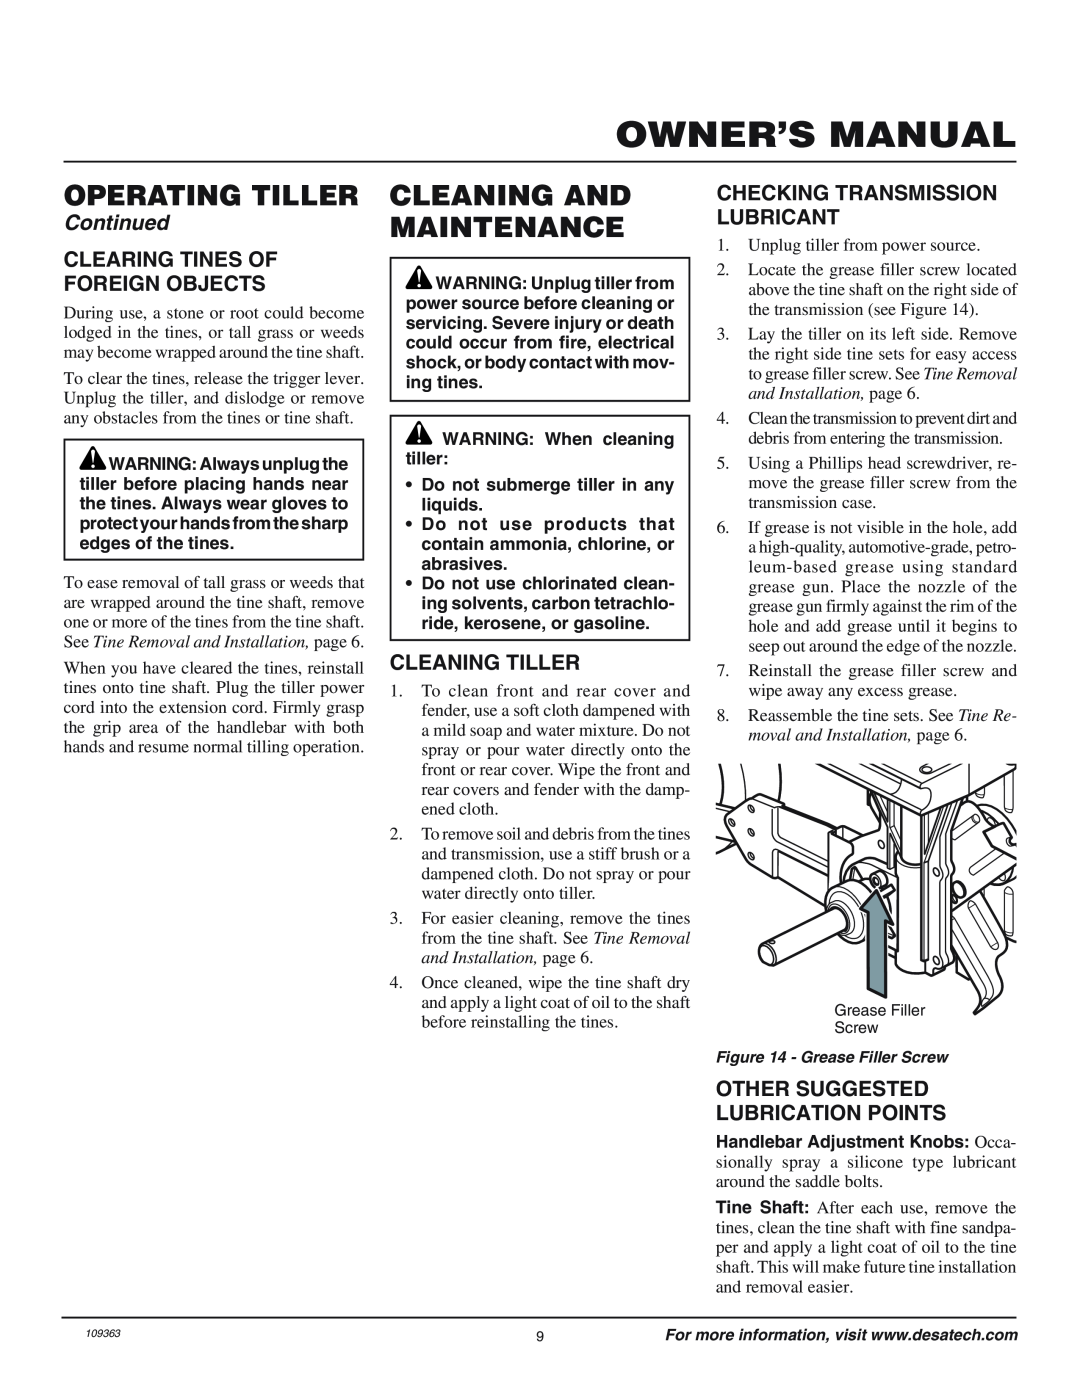 Remington 109312-01 Cleaning And Maintenance, Clearing Tines Of Foreign Objects, Cleaning Tiller, Owner’S Manual 